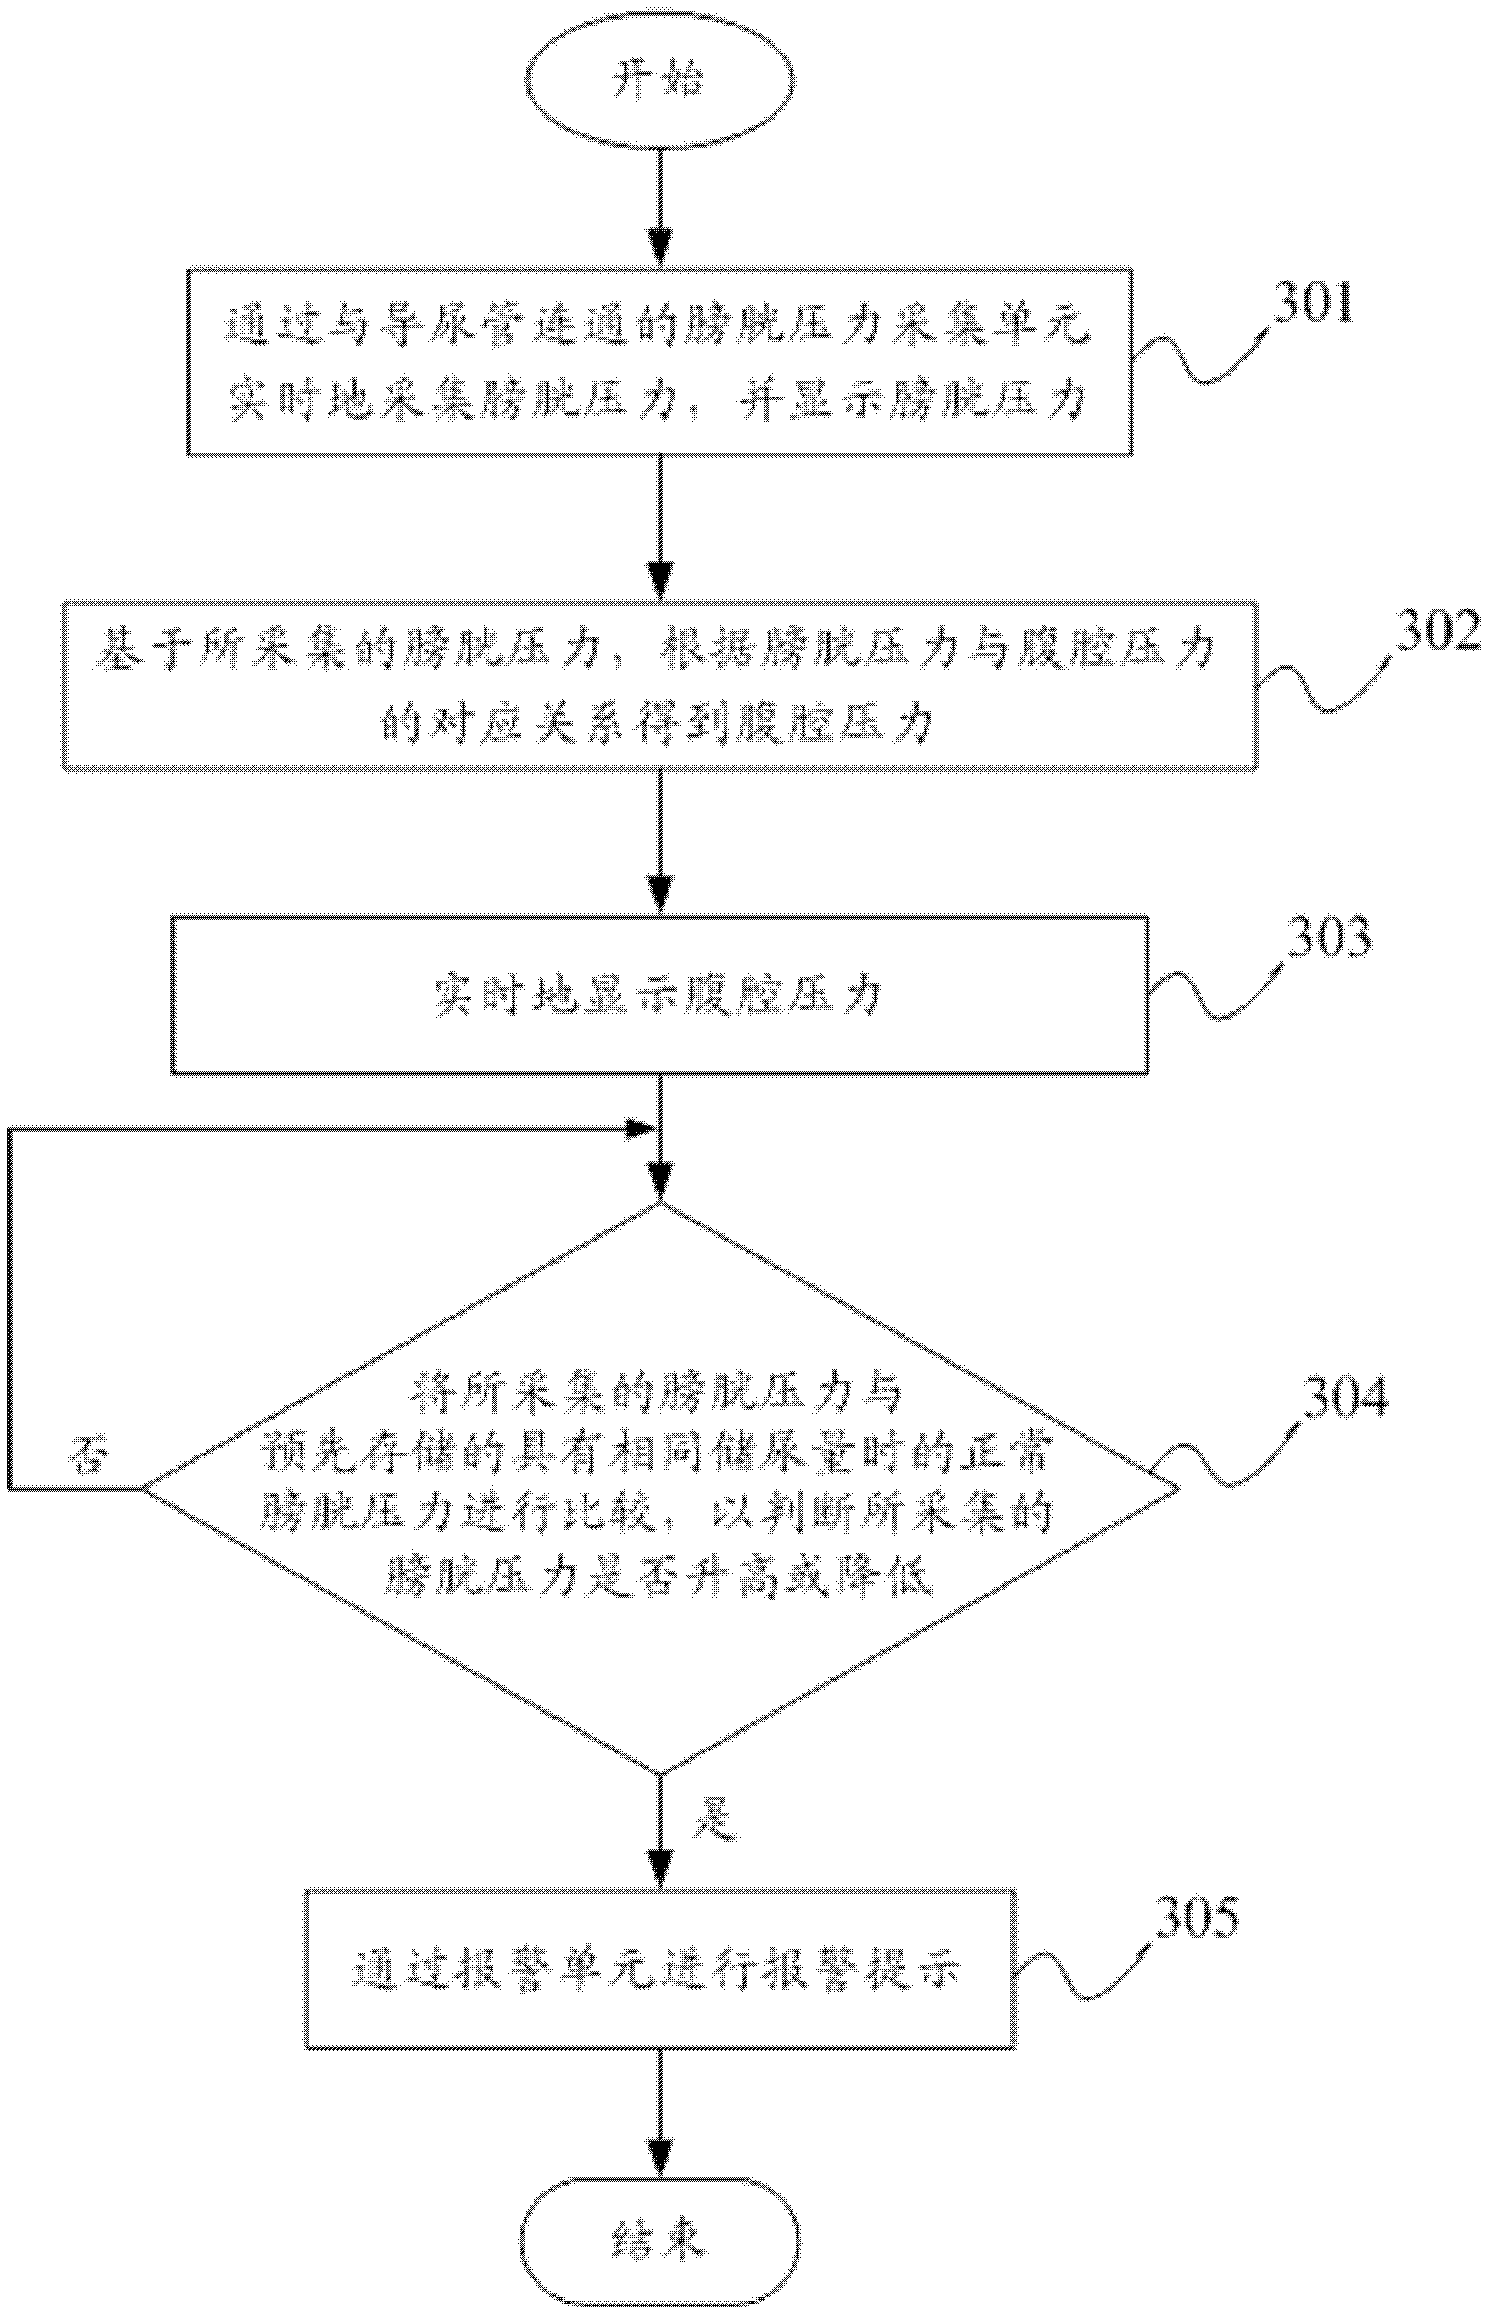 System and method for monitoring urinary bladder pressure and abdominal pressure